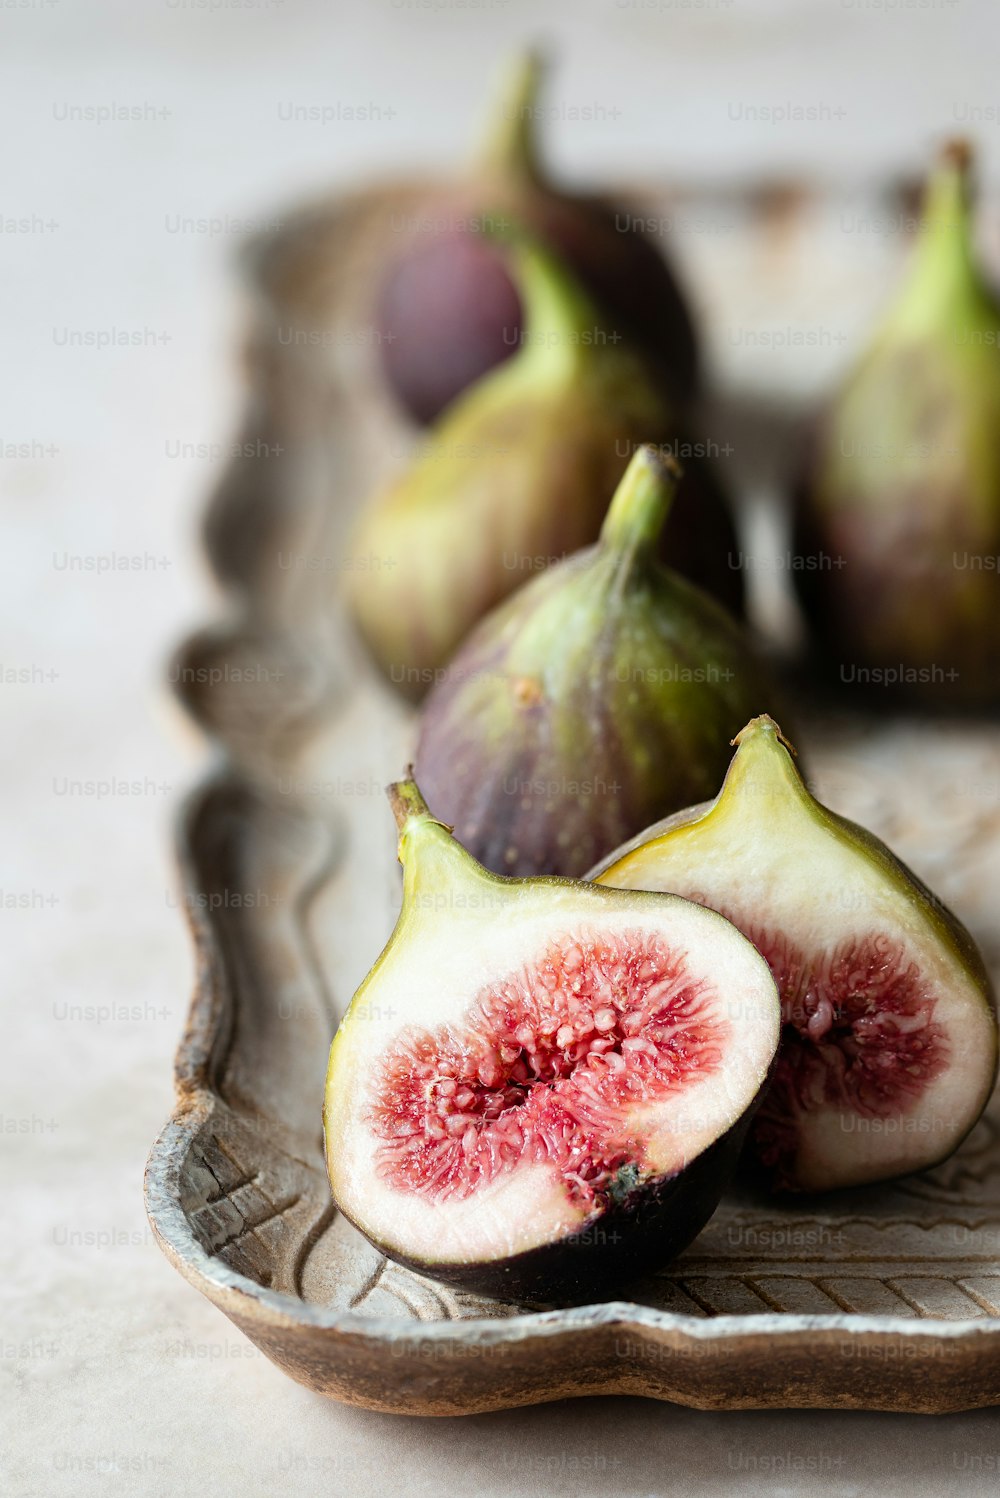 figs on a plate on a table